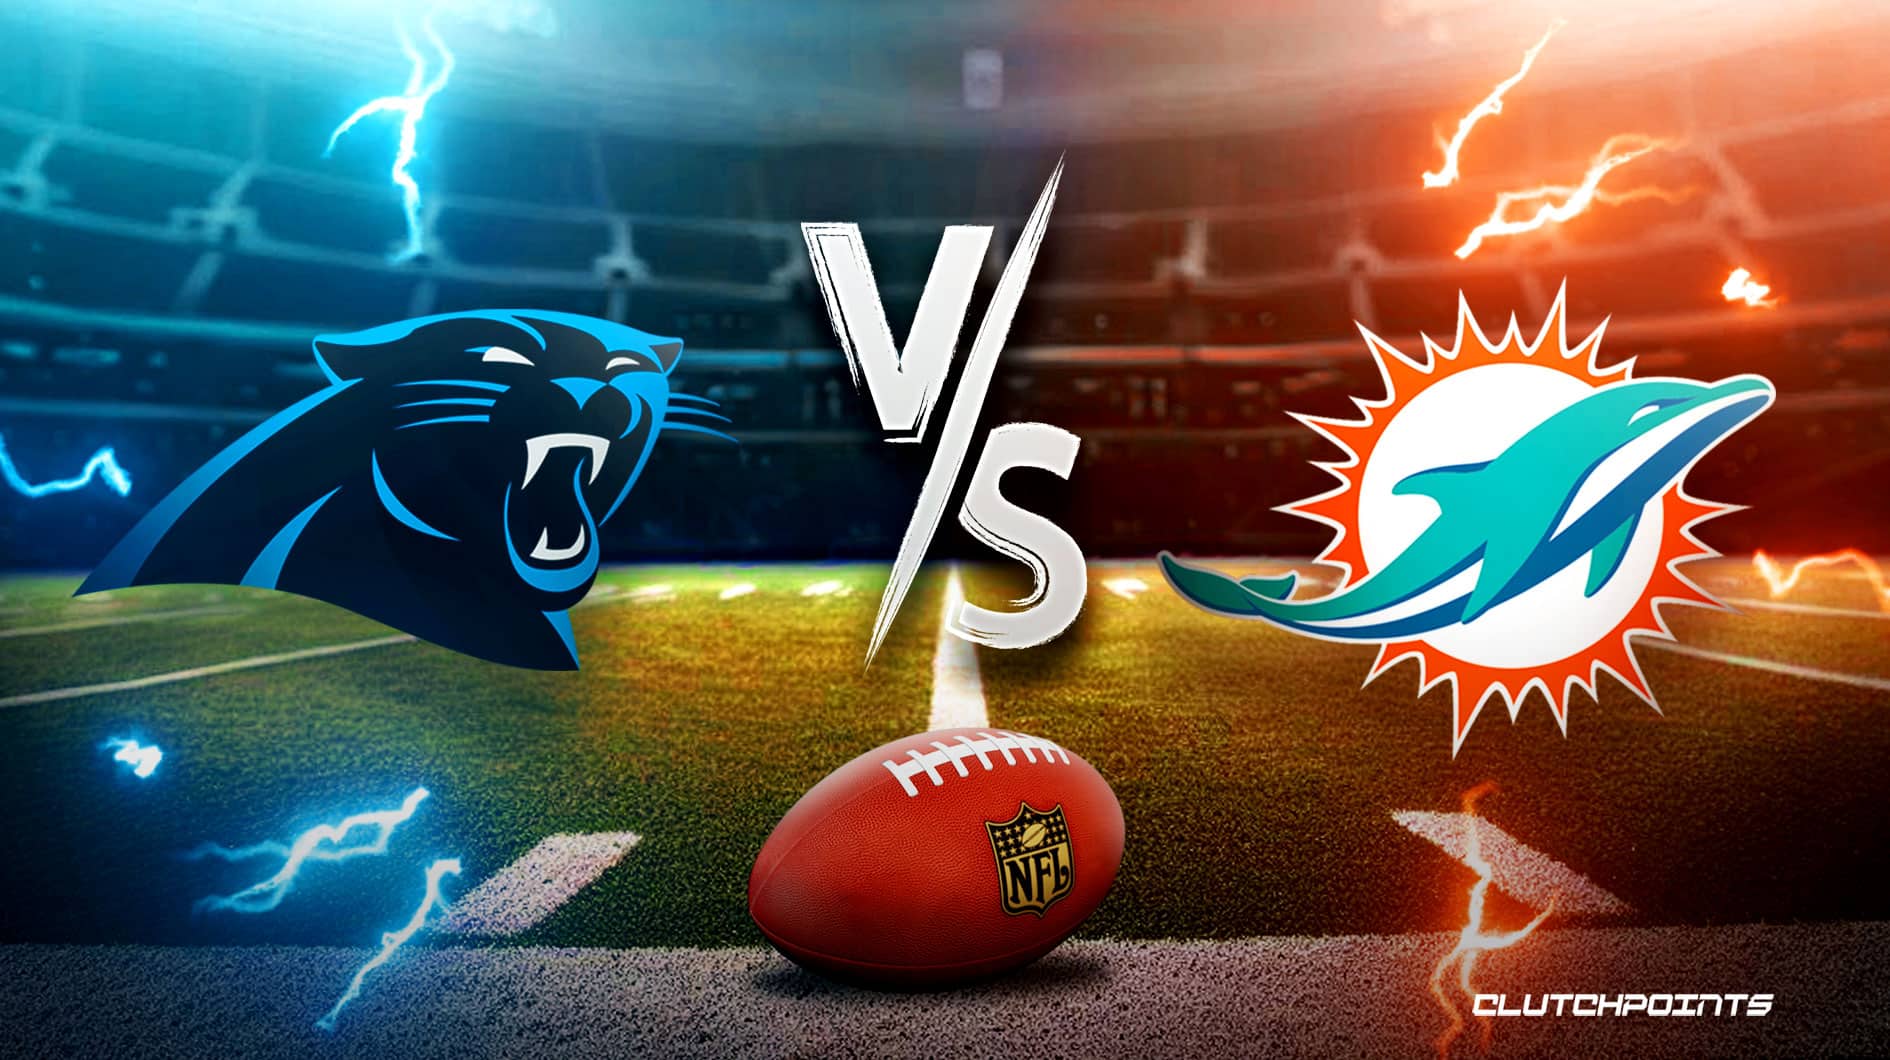 PanthersDolphins prediction, odds, pick, how to watch NFL Week 6 game